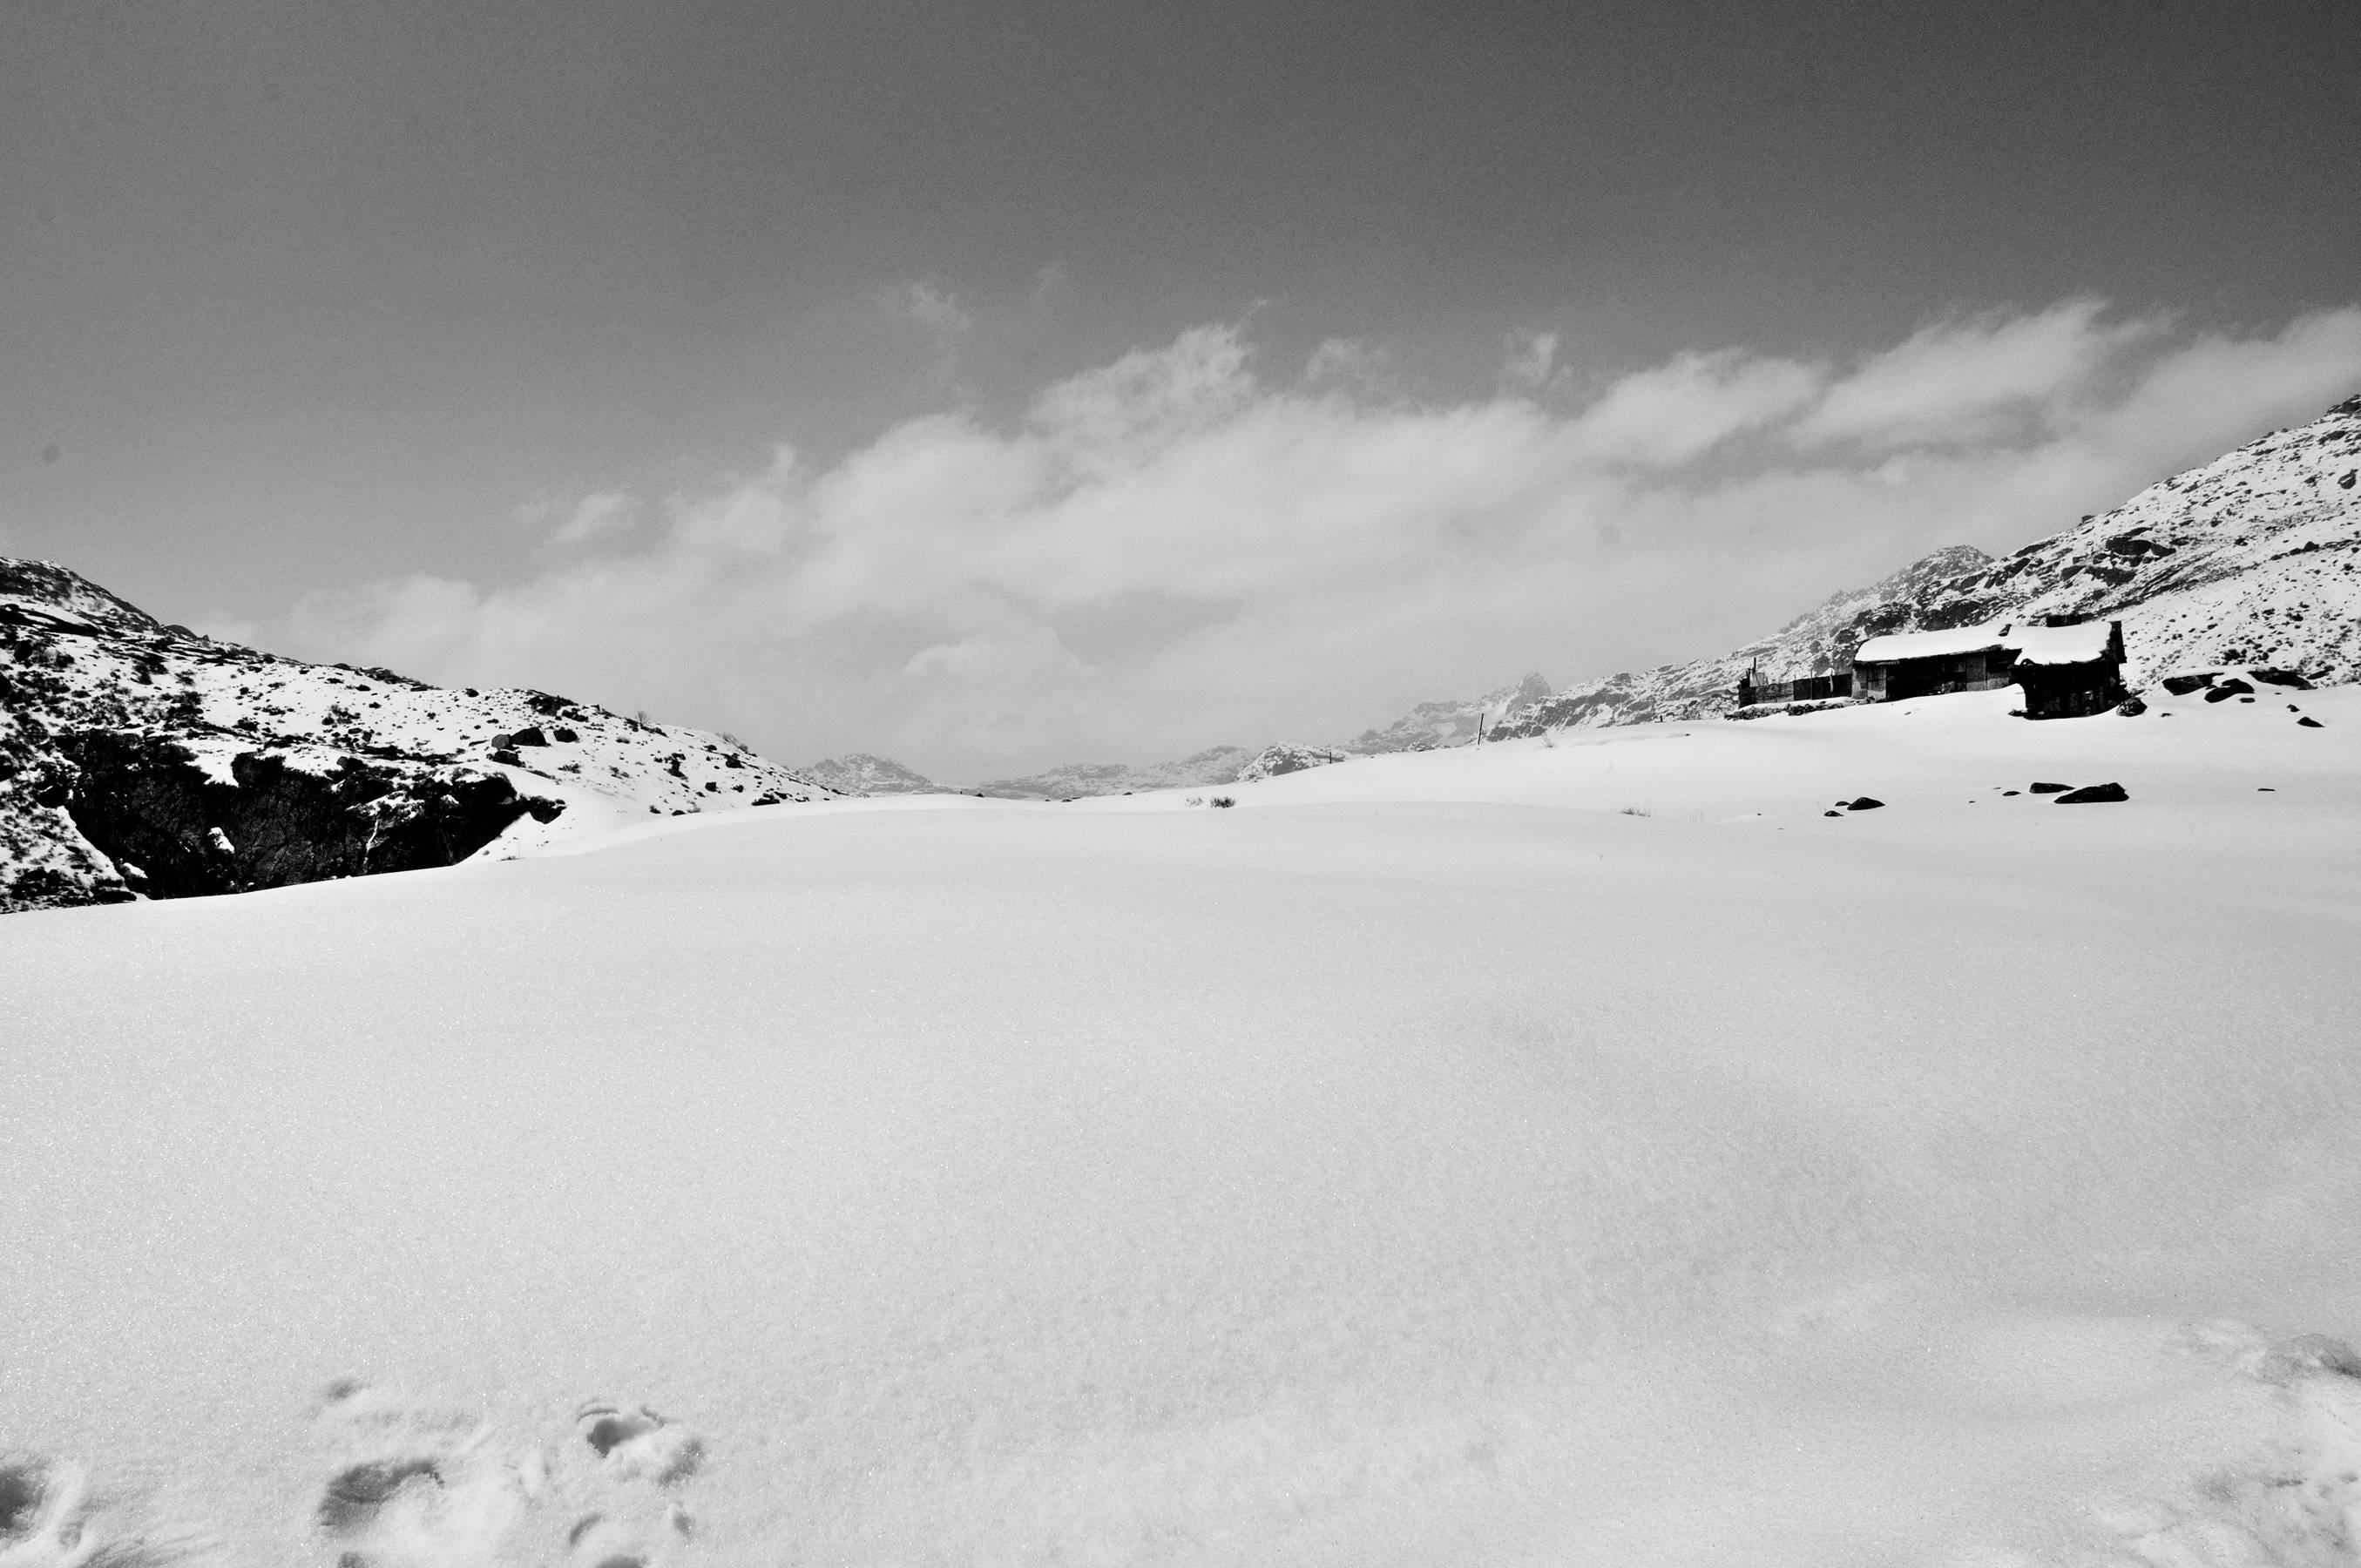 Mohan L. Mazumder Black and White Photograph - Snowy Hills Scenery, Black & White Photography by Indian Artist "In Stock"